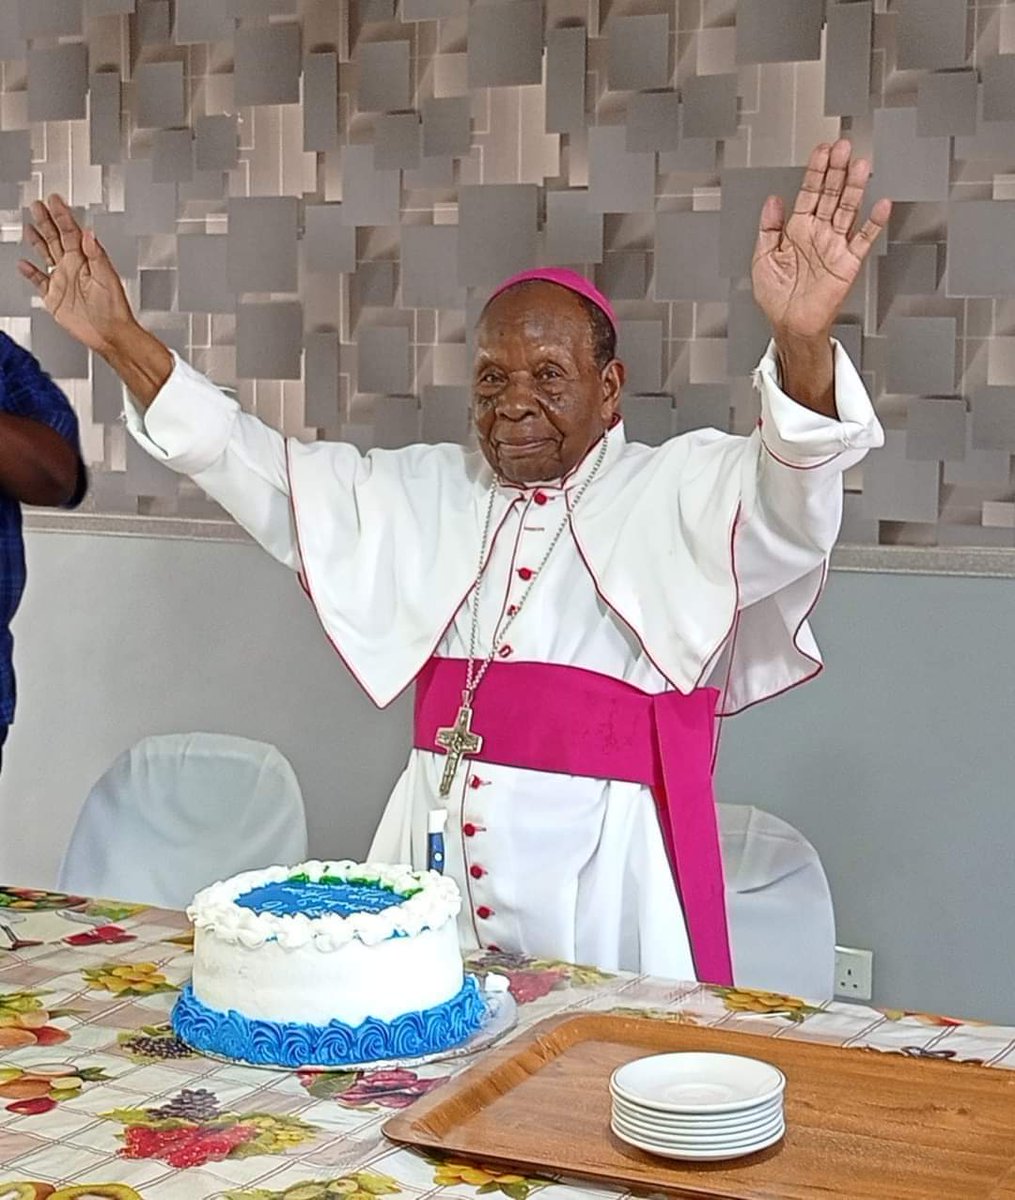 Happy 96th birthday to Bishop Emeritus Allan Chamgwera of the Diocese of Zomba, who was born on April 30, 1928. We are grateful to God for his life. All glory to God!